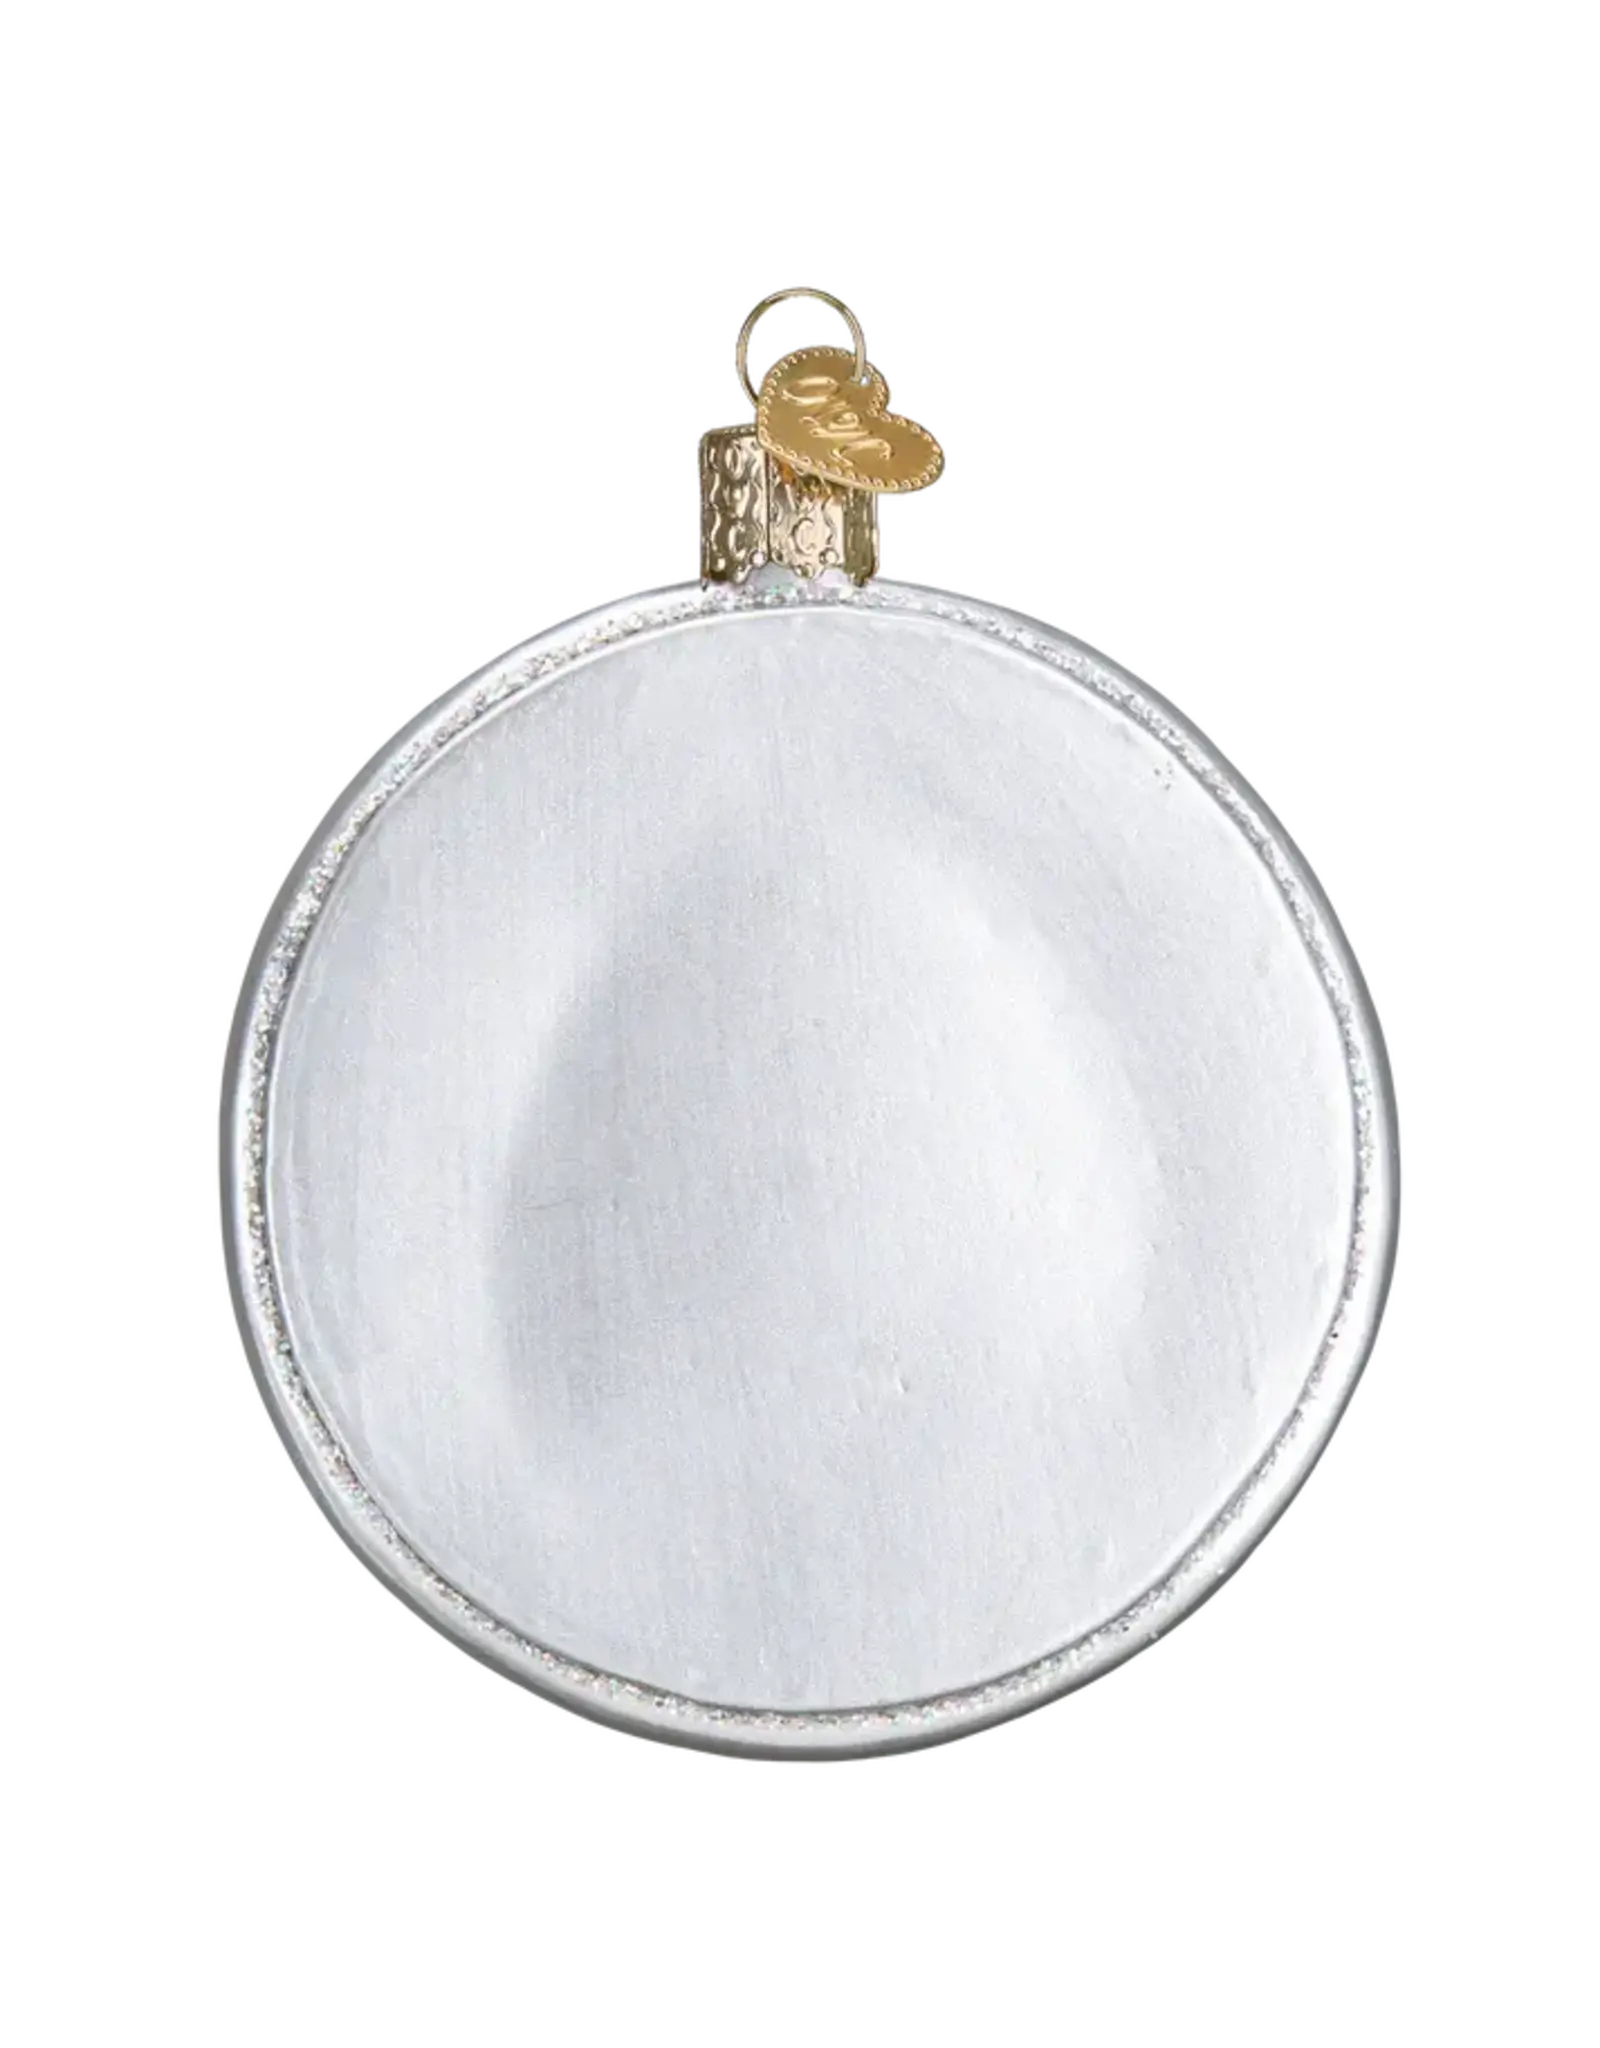 Old World Christmas Pizza Pie Ornament